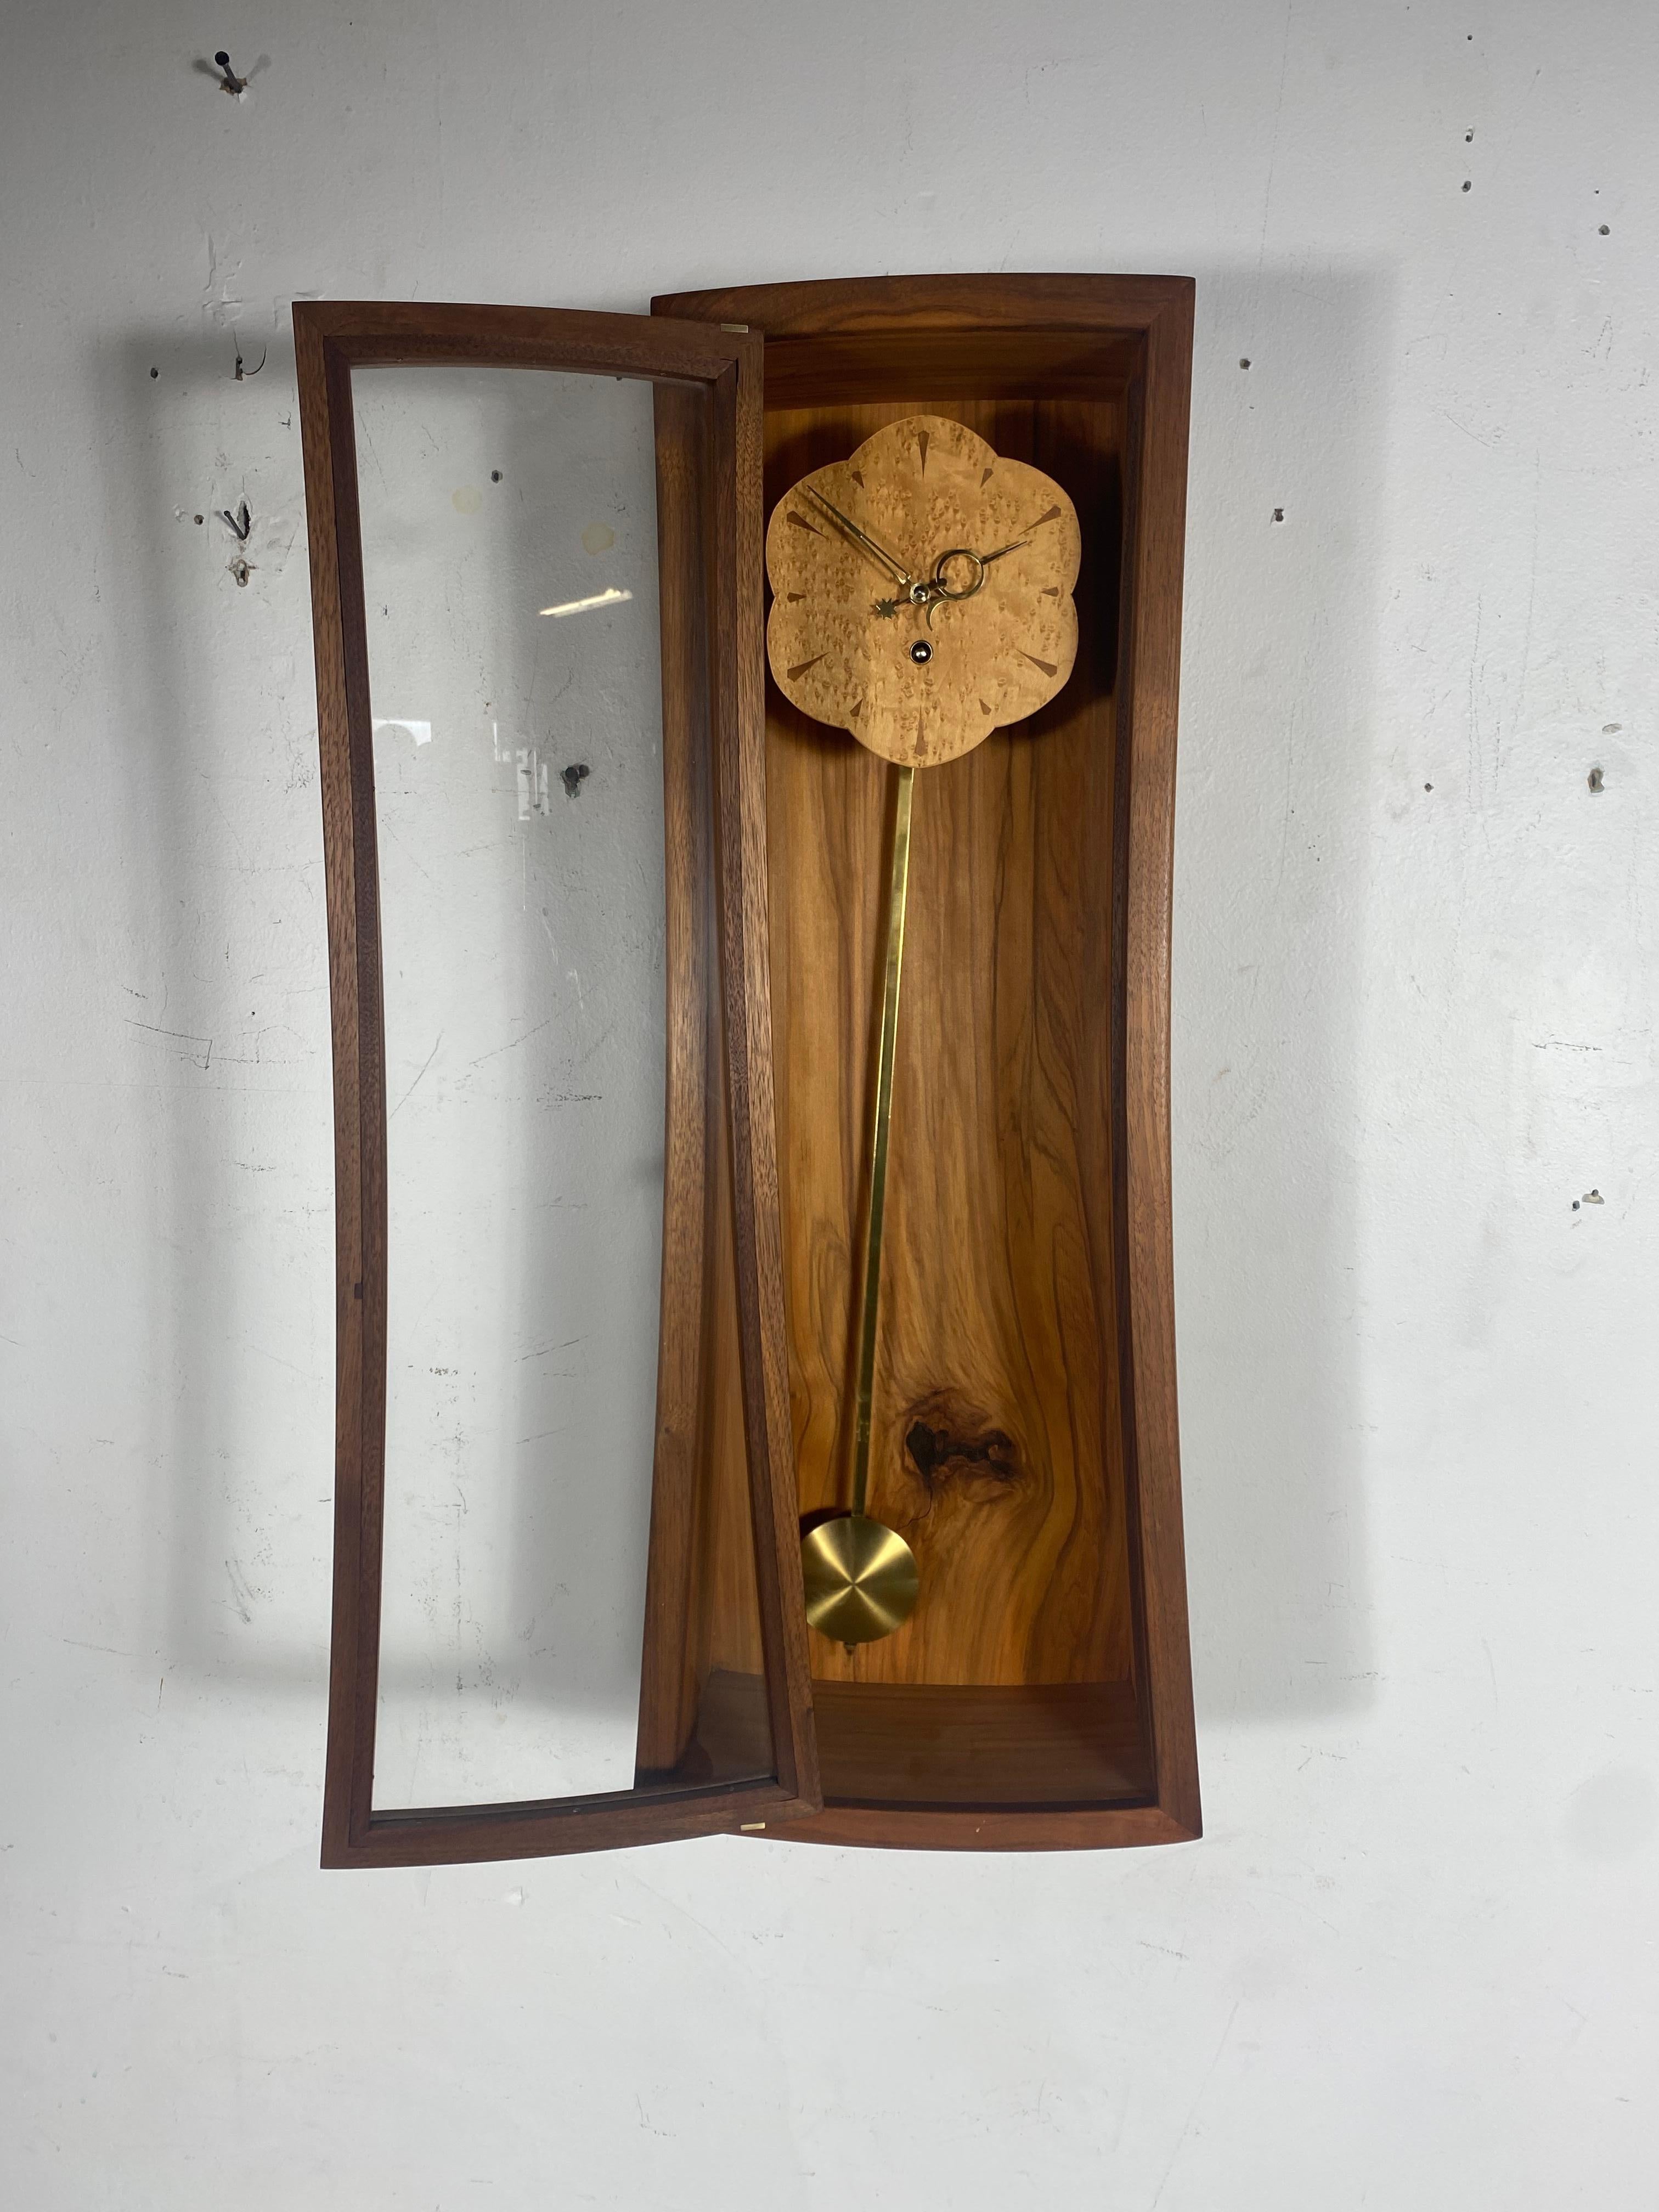 Hand-Crafted American Craft, Hand Wall Clock , Scandinavian Modern Design by George Gordon For Sale